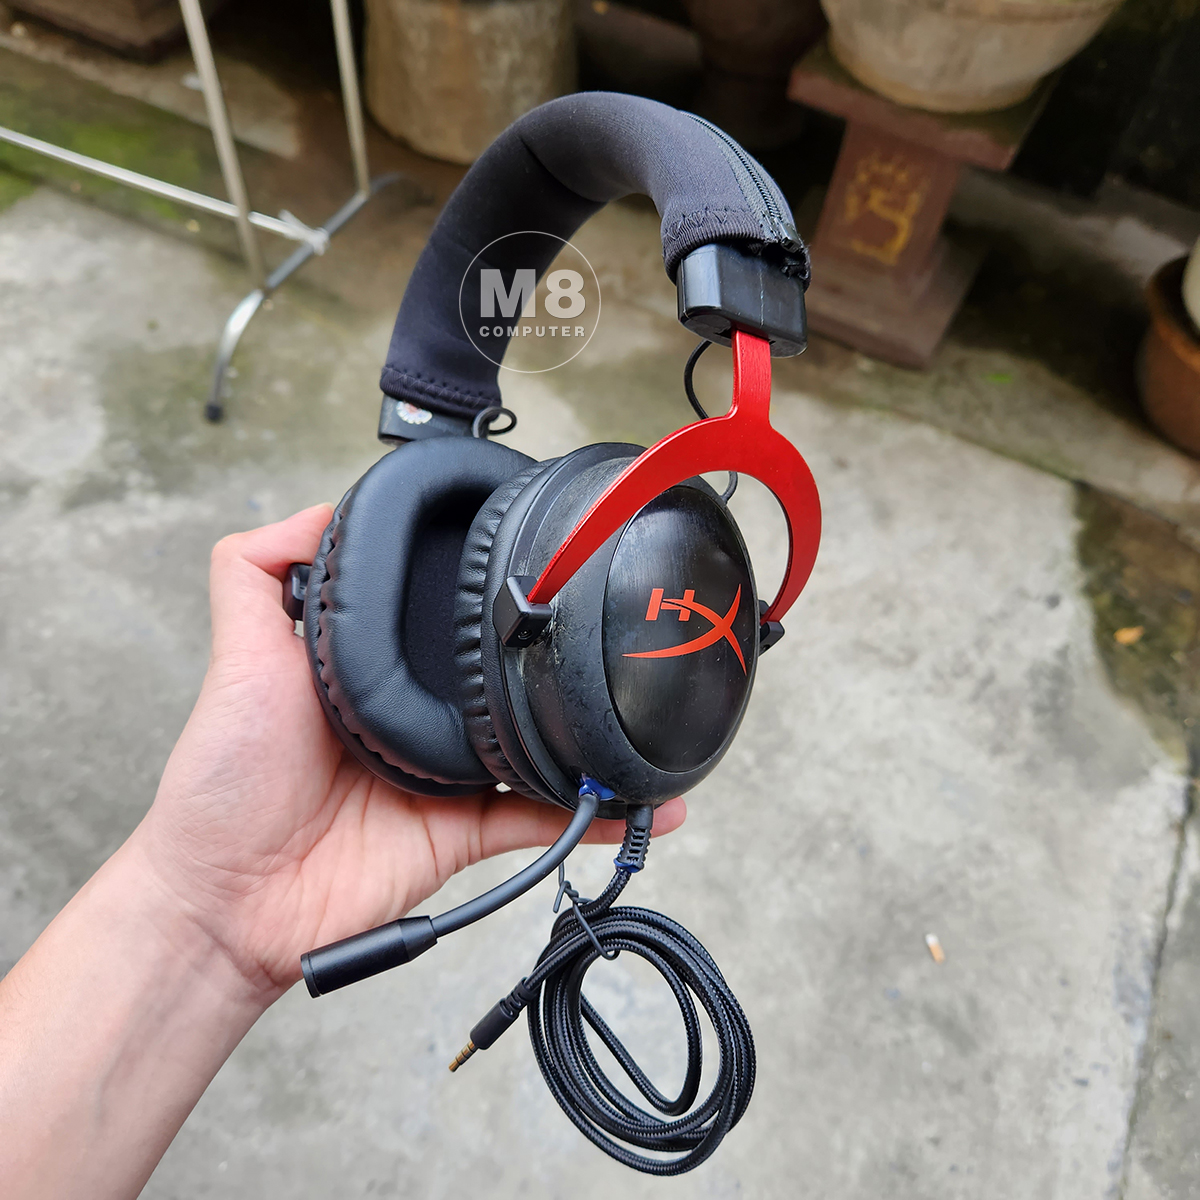 Gaming Review: HyperX Cloud II - Tried, True, and Reliable